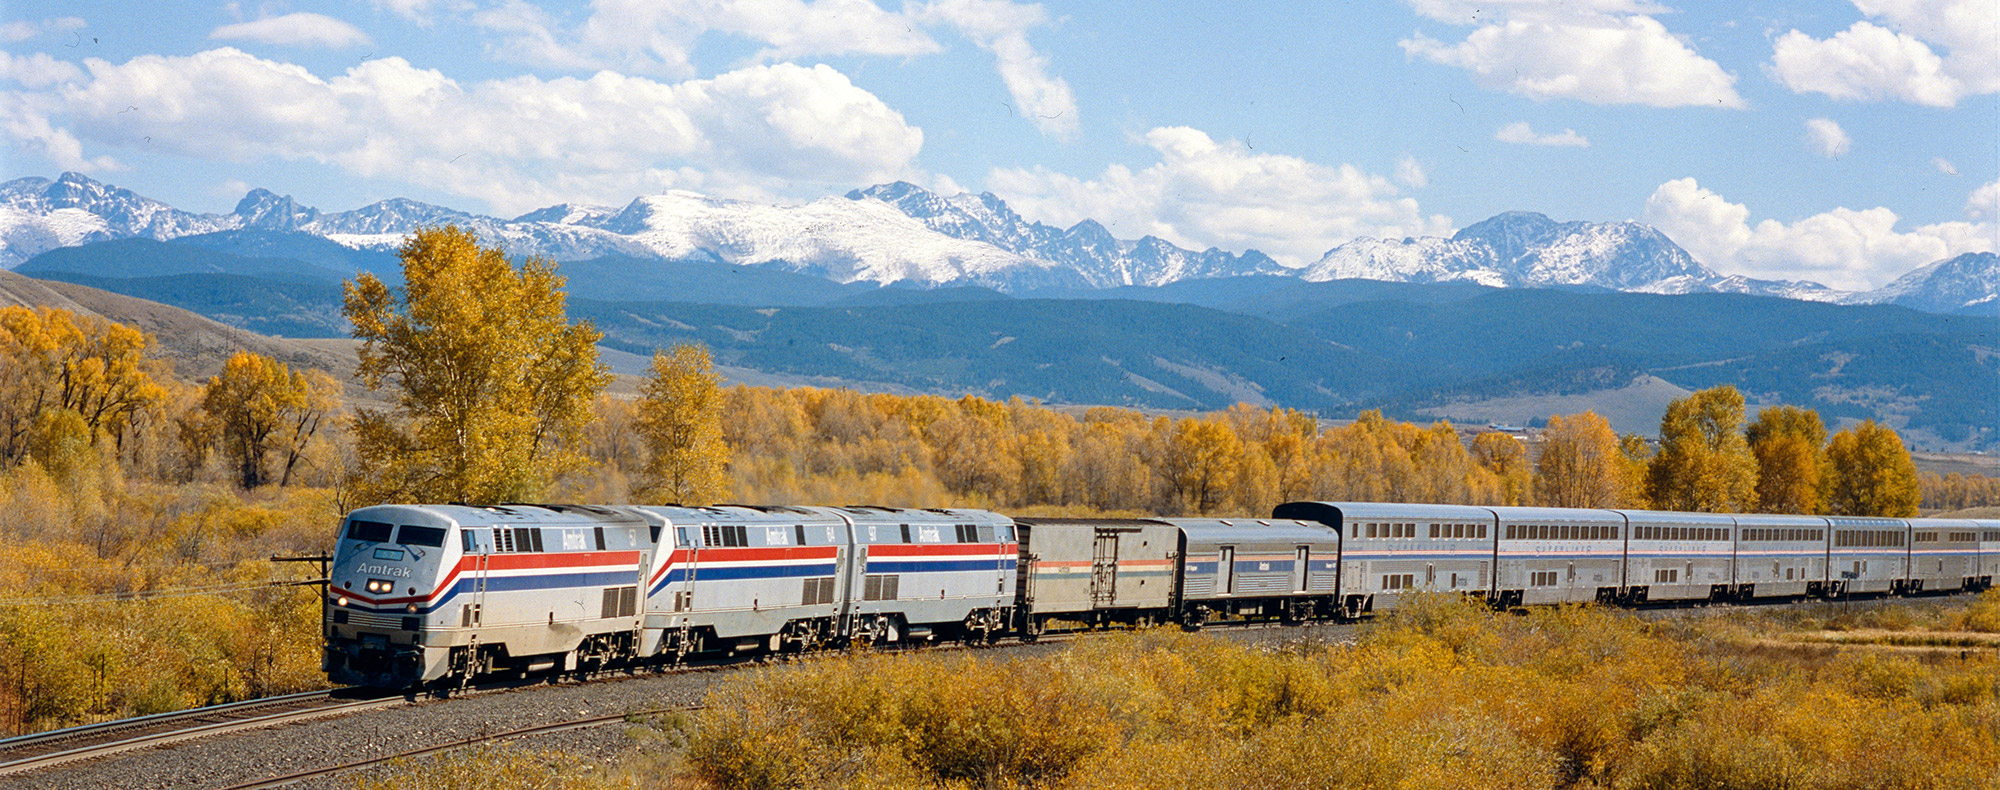 Train in Valley with Scenic Mountains in Background